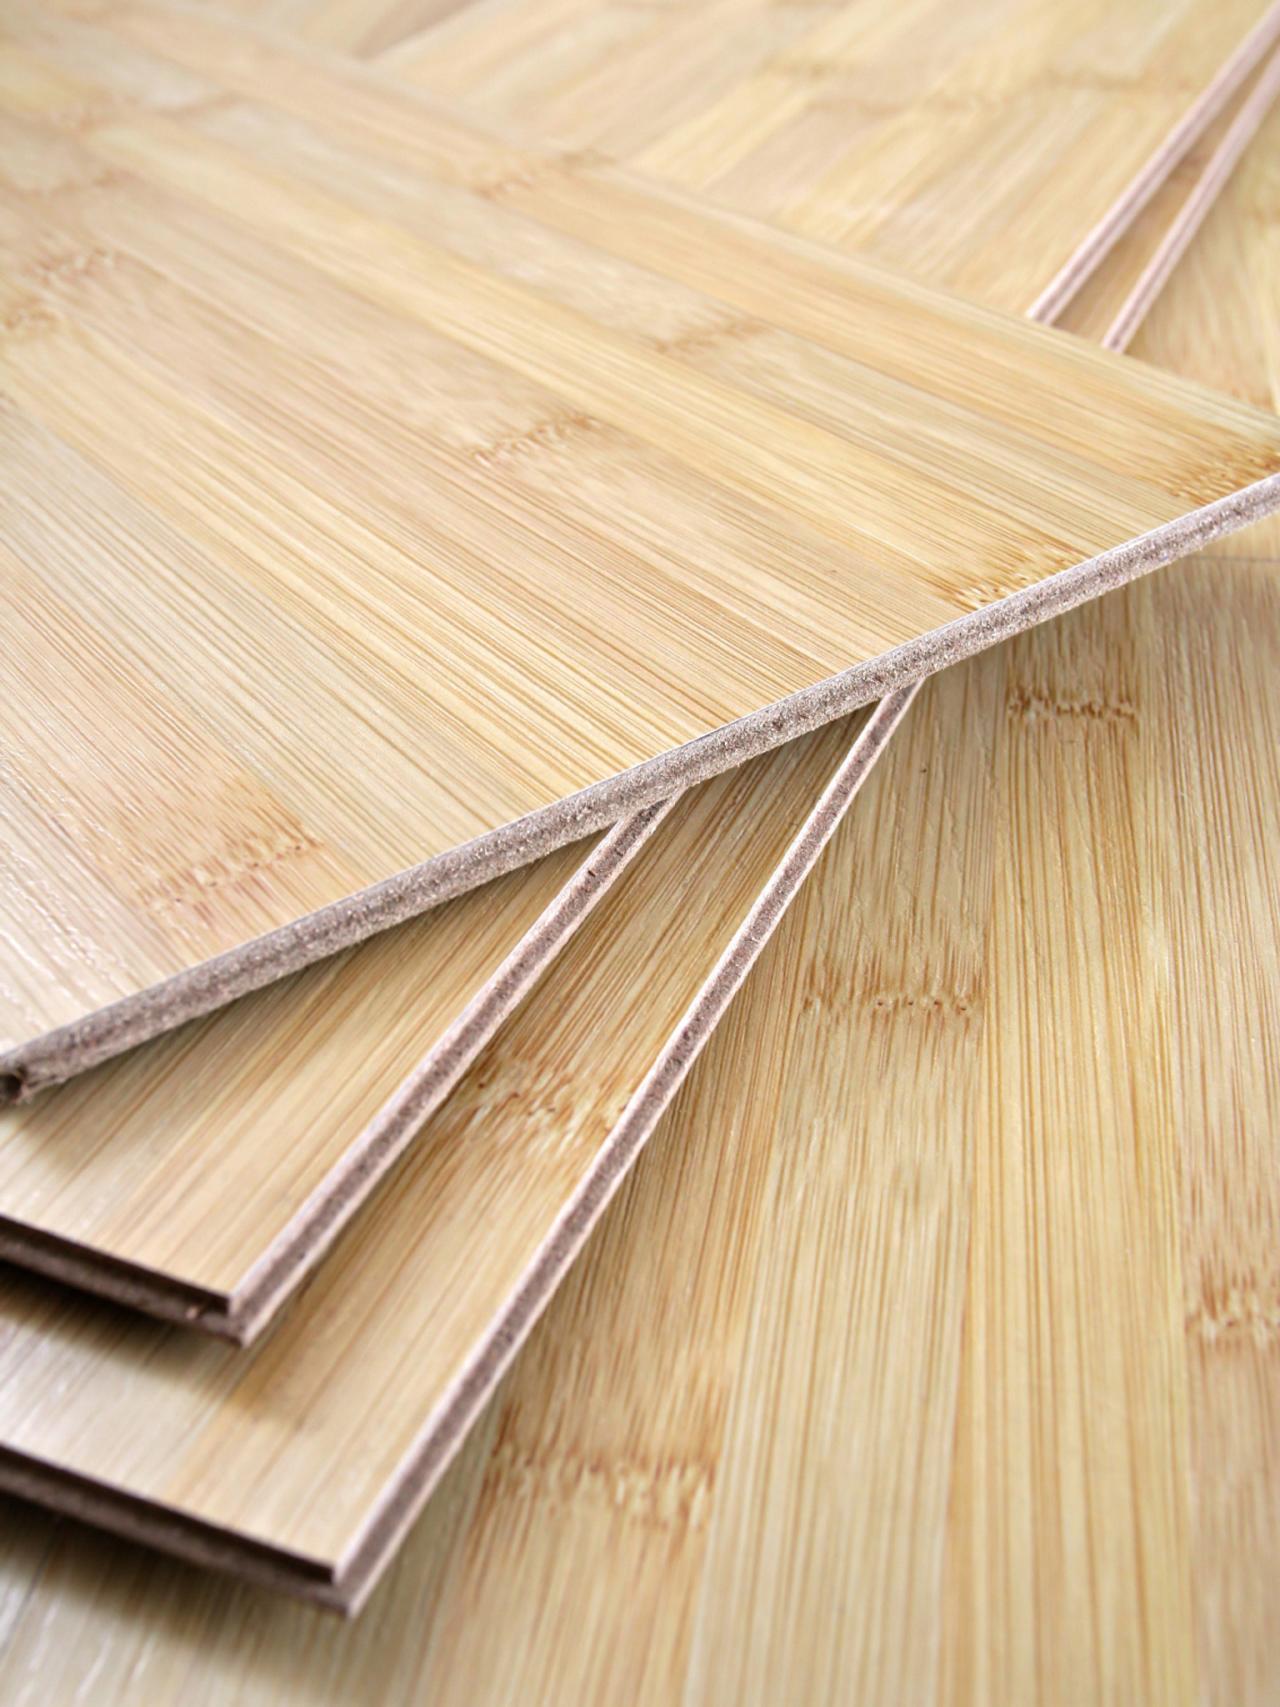 The Pros And Cons Of Bamboo Flooring Diy, Are Bamboo Floors Durable For Dogs